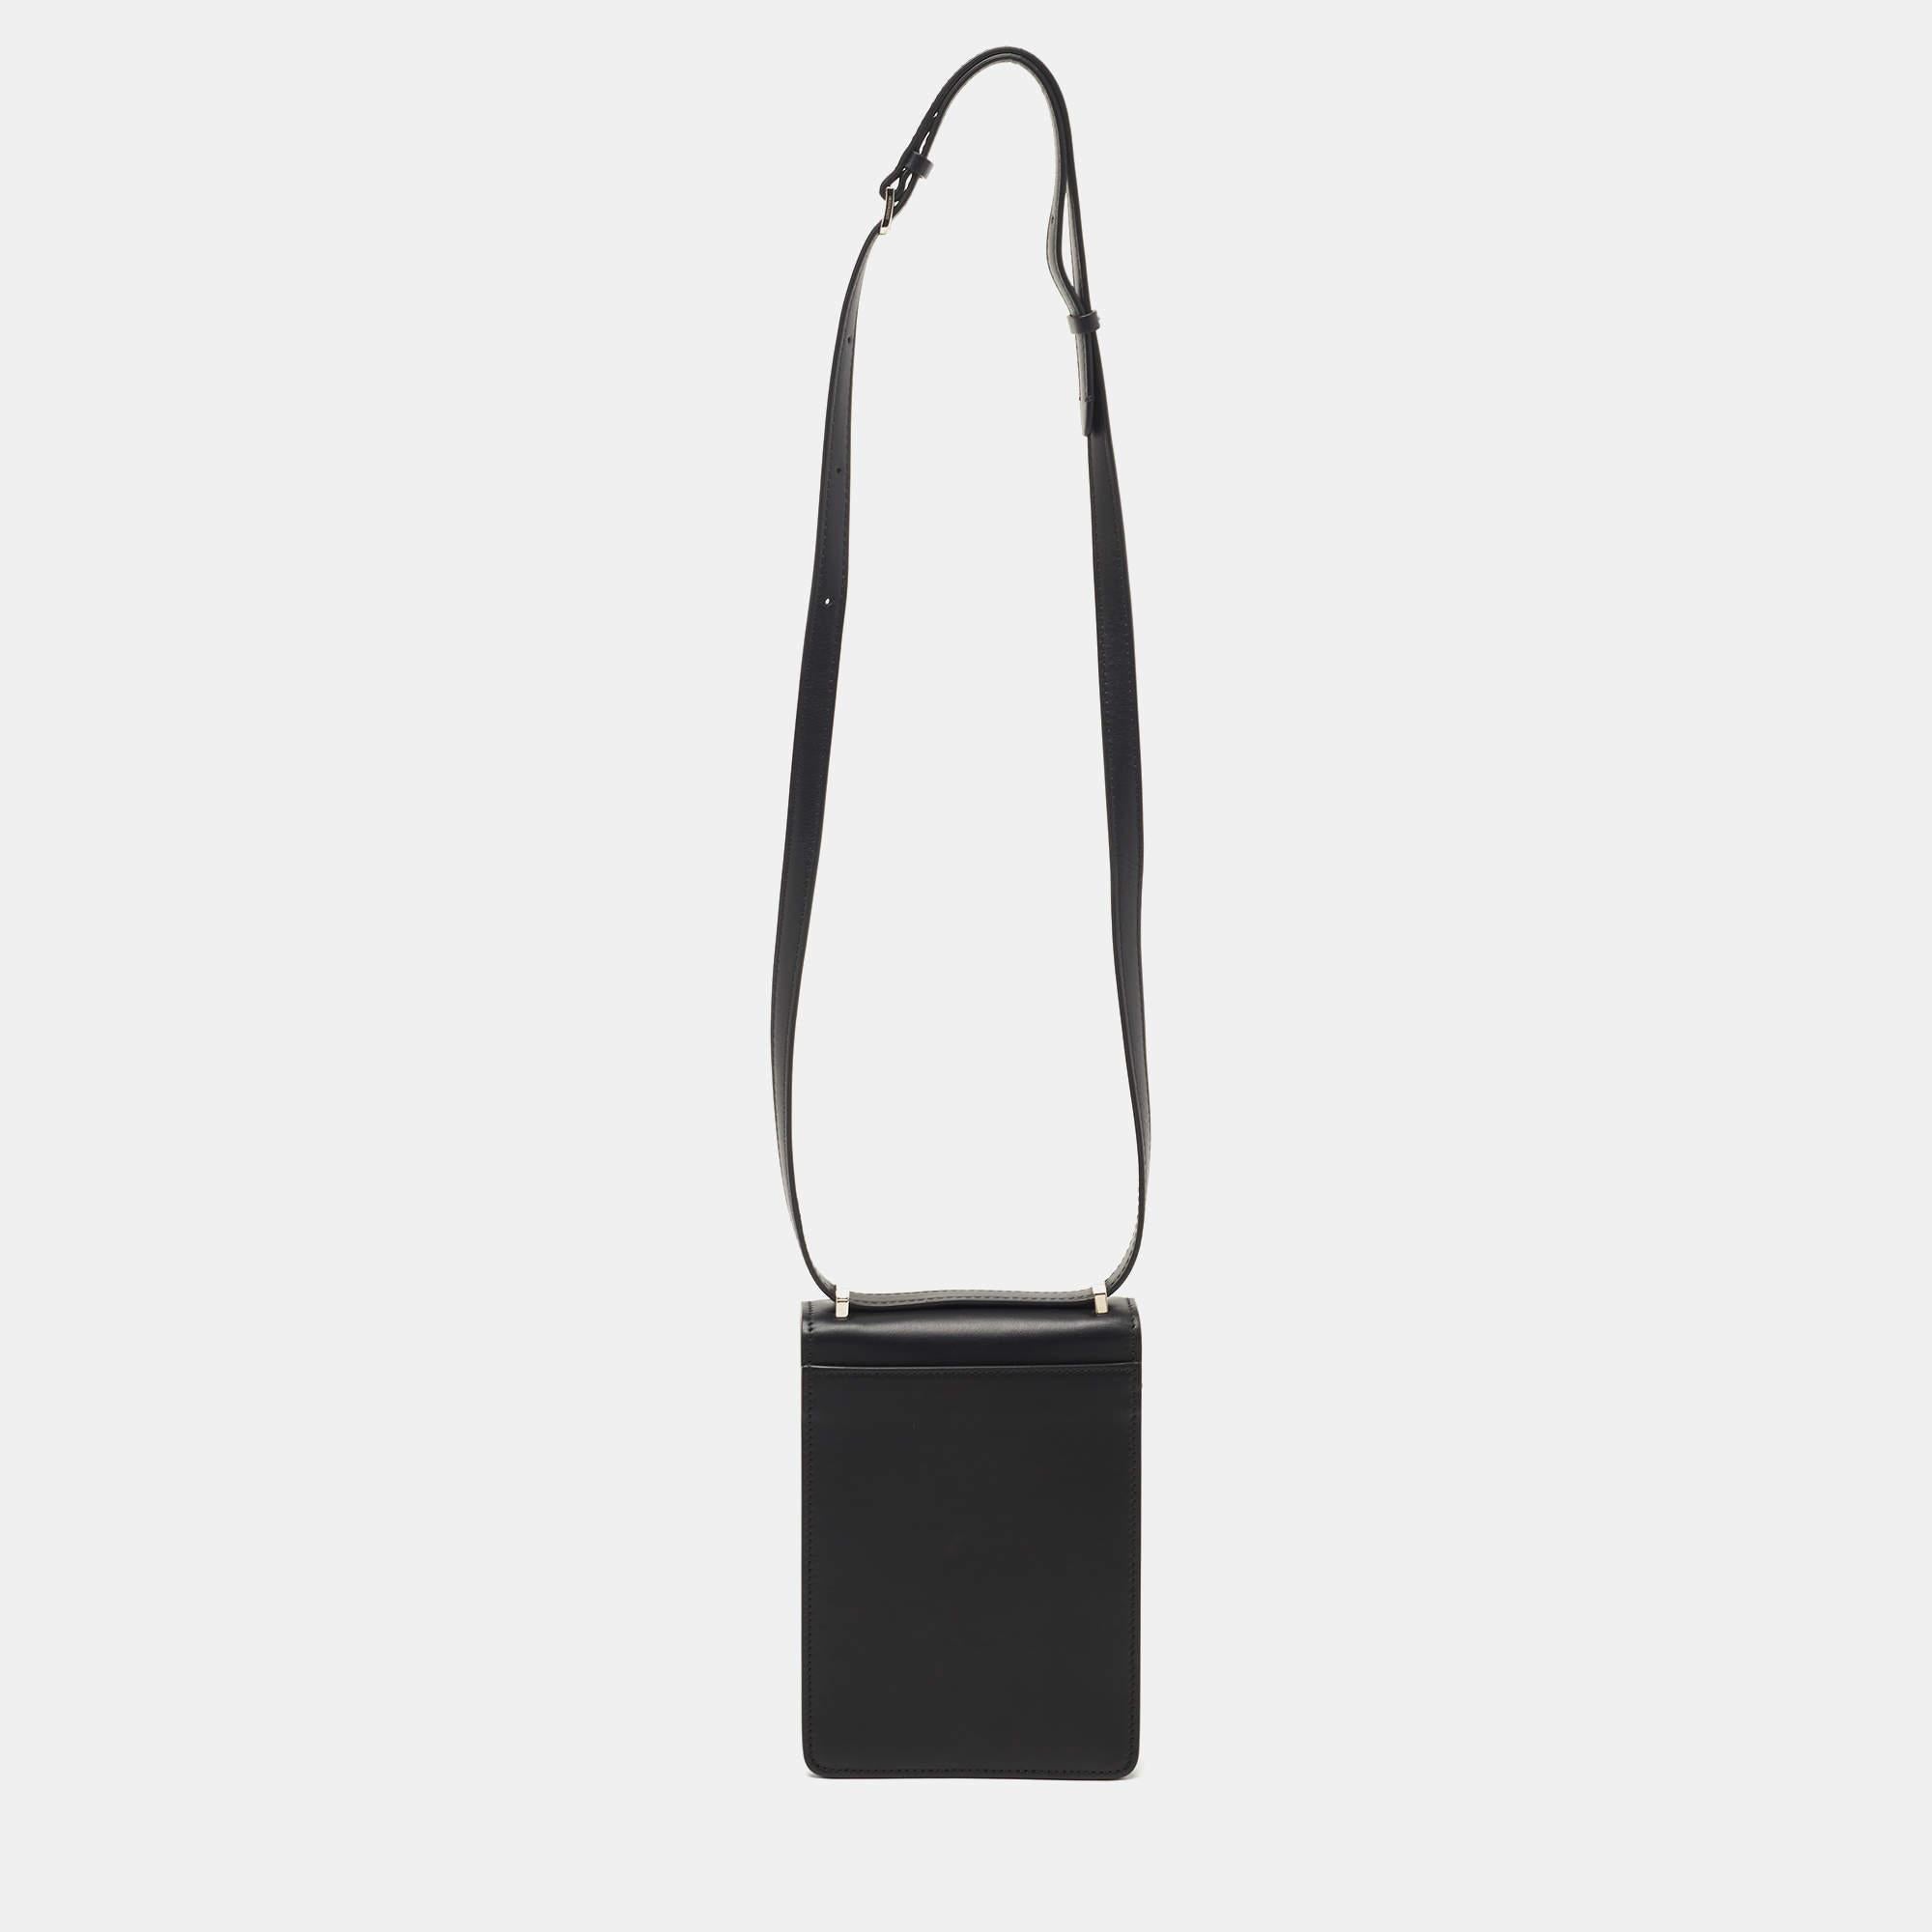 Burberry's Robin crossbody bag is a great investment piece that's super chic too. It's finished with a TB clasp on the flap and has a long shoulder strap so that it can be flaunted in a number of ways.

Includes: Original Dustbag, Brand Tag

